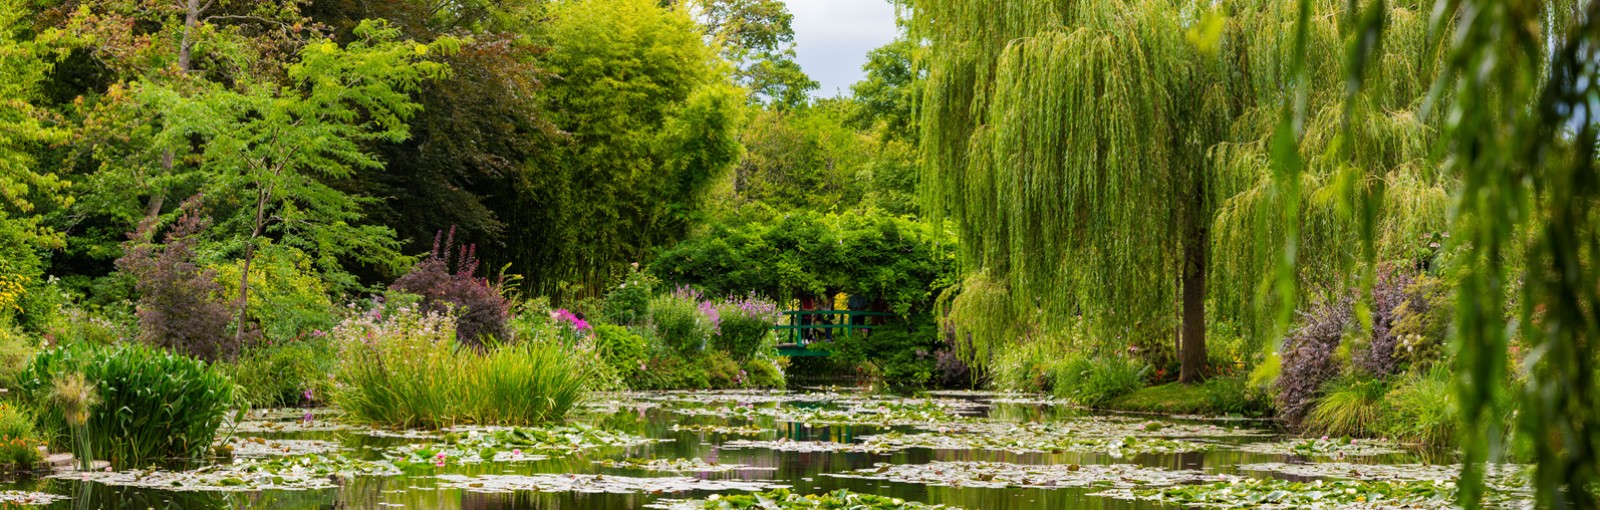 Tours Painting Experience near Giverny - Full days - Day tours from Paris